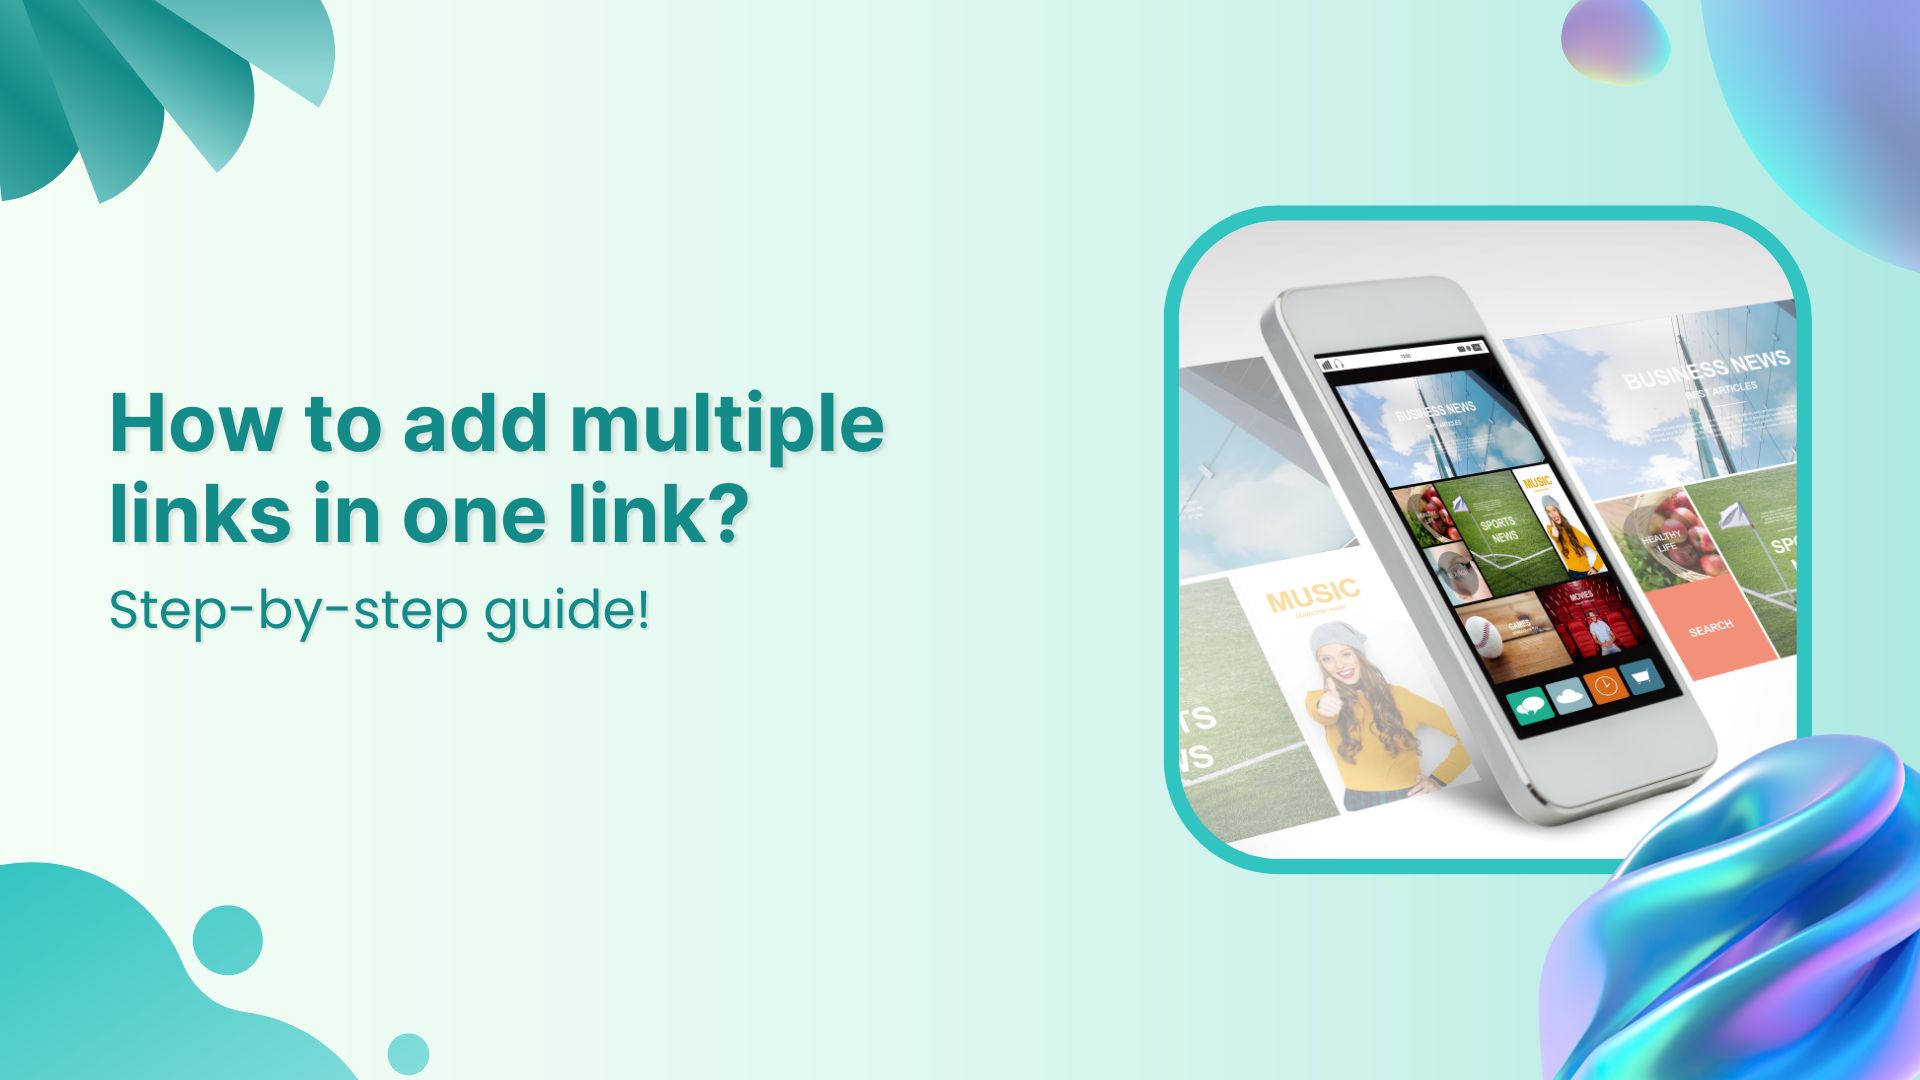 How to add multiple links in one link: Step-by-step guide